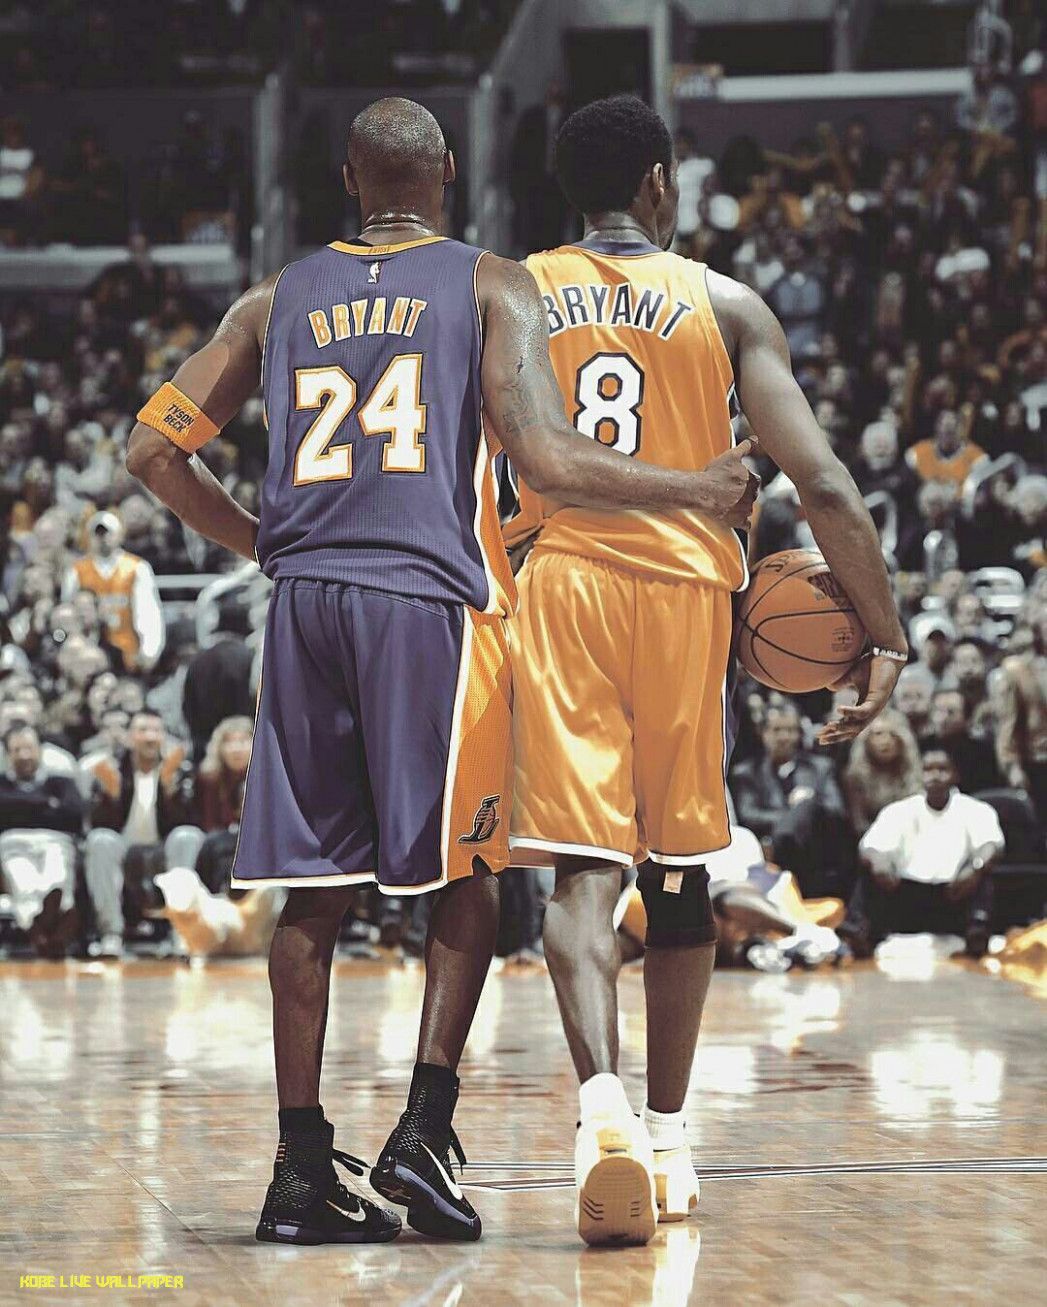 Kobe Bryant standing on the court with his arm around another player - Kobe Bryant